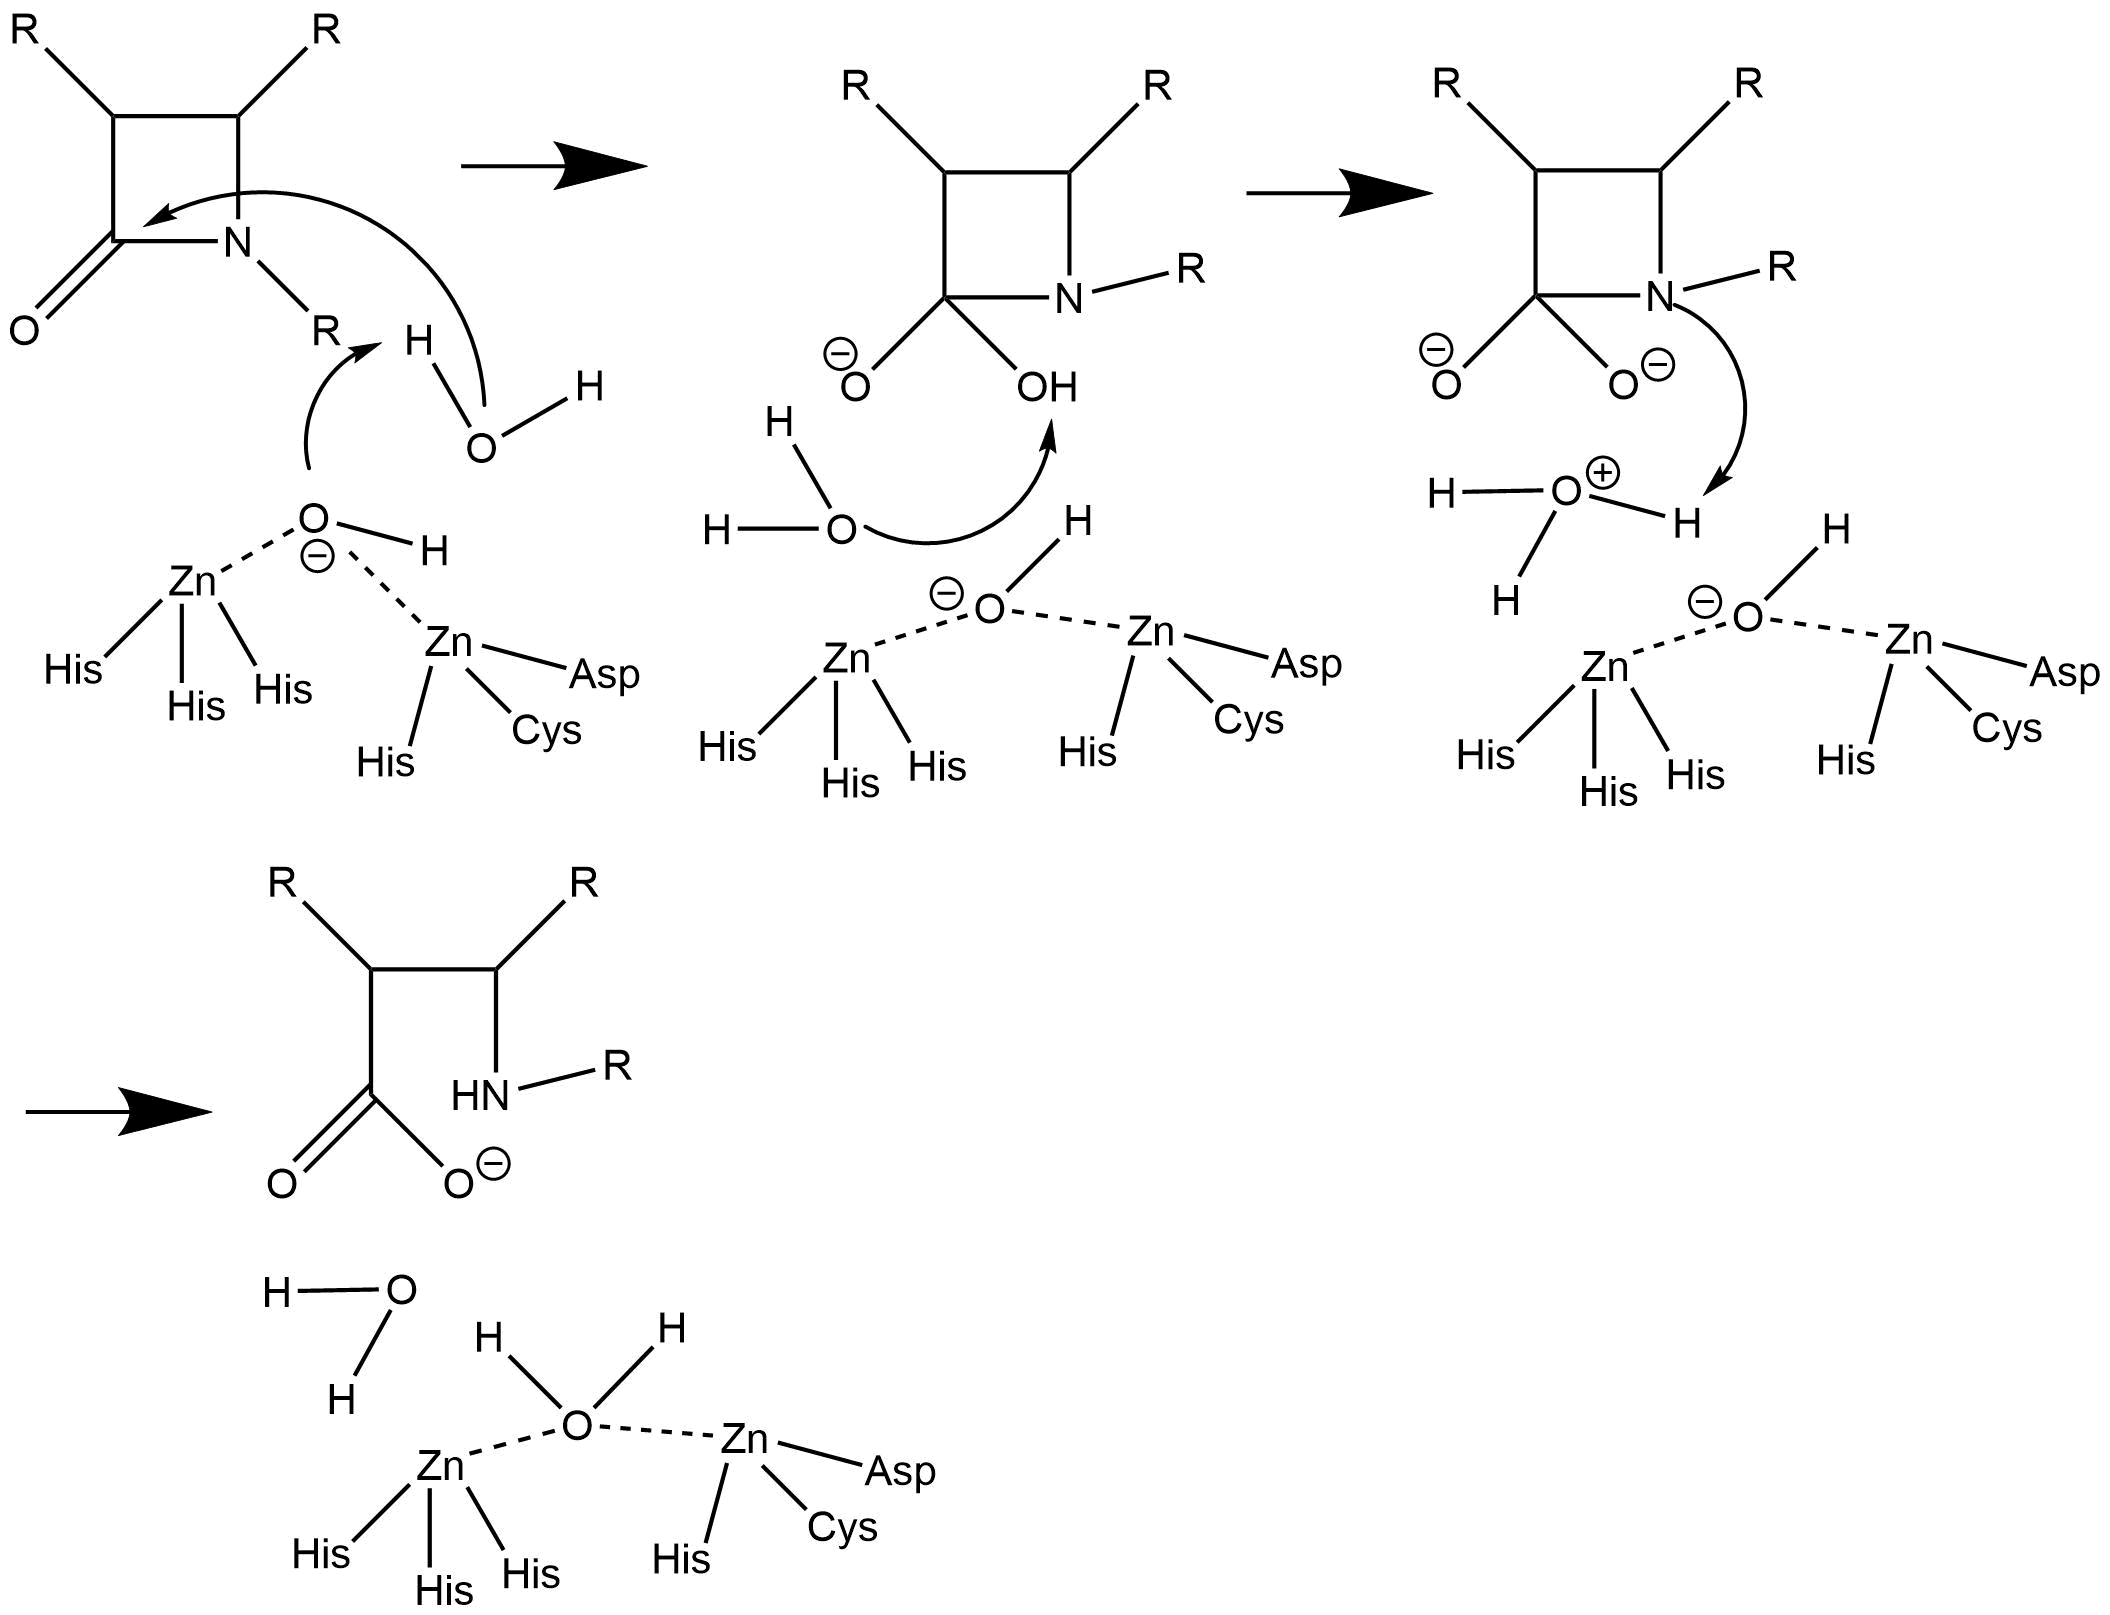 One proposed mechanisms of the hydrolysis of beta-lactam antibiotics by the zinc ions and nucleophilic water molecule present in the active site of NDM-1.